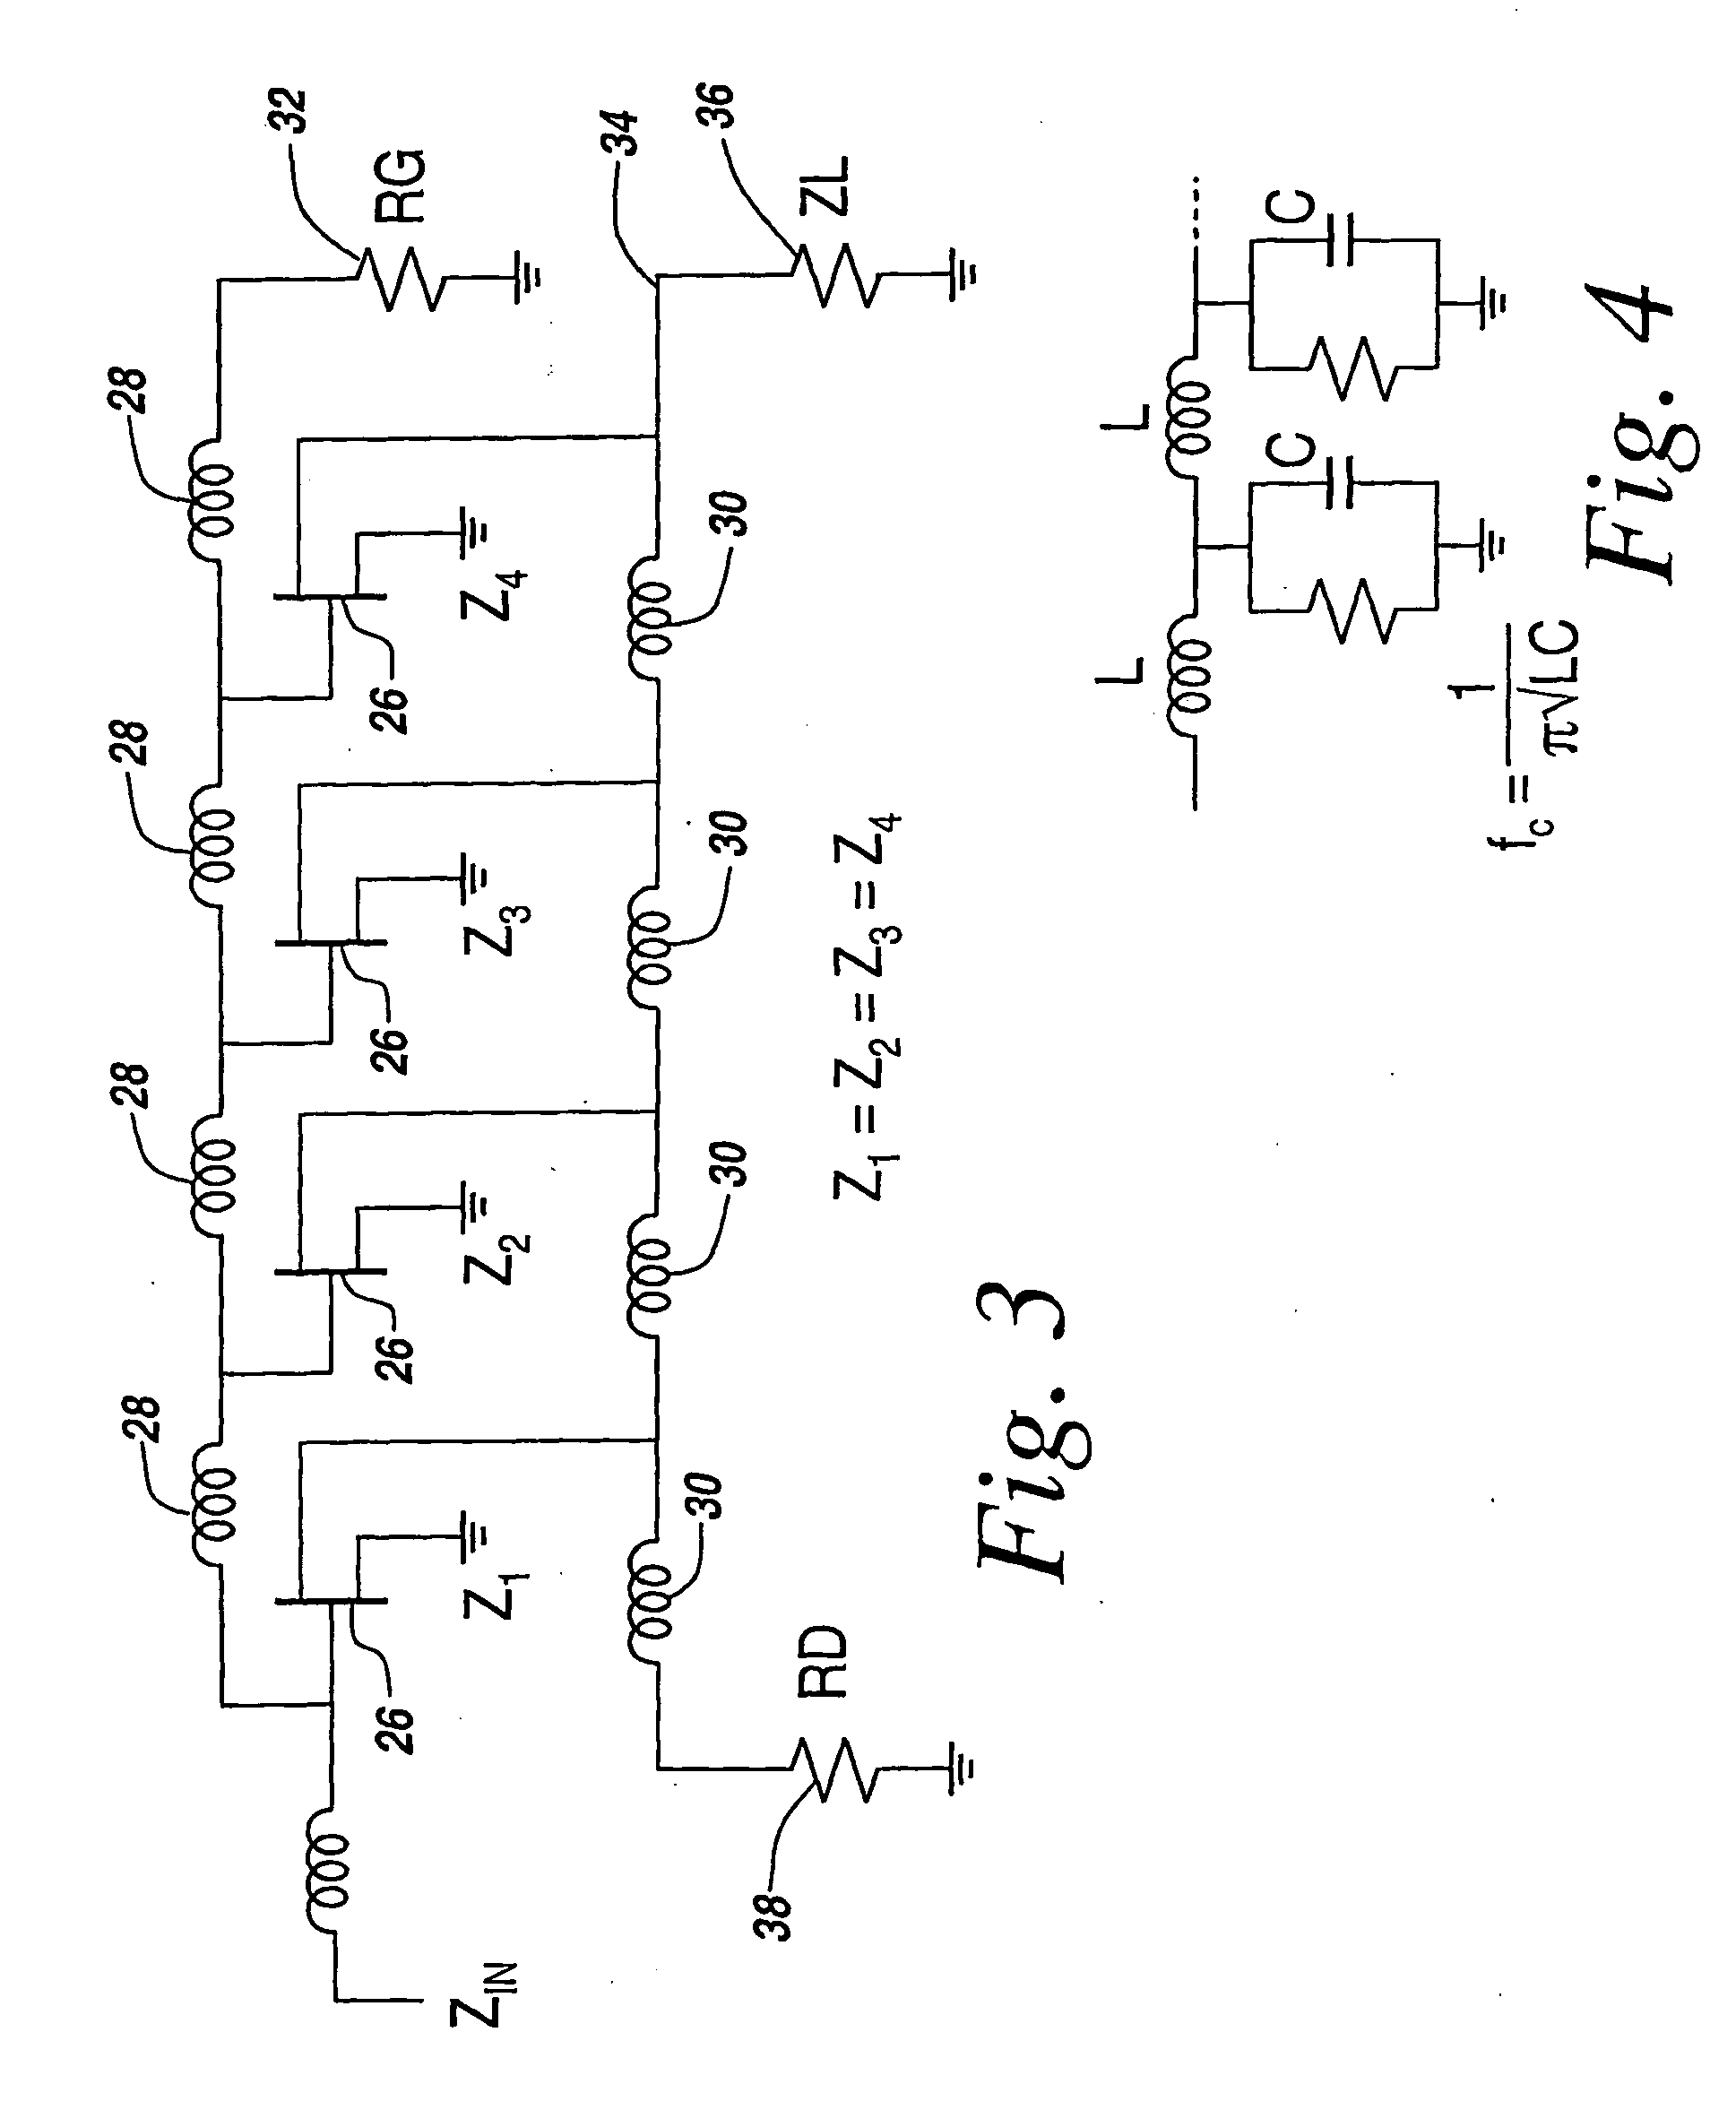 Solid-state ultra-wideband microwave power amplifier employing modular non-uniform distributed amplifier elements